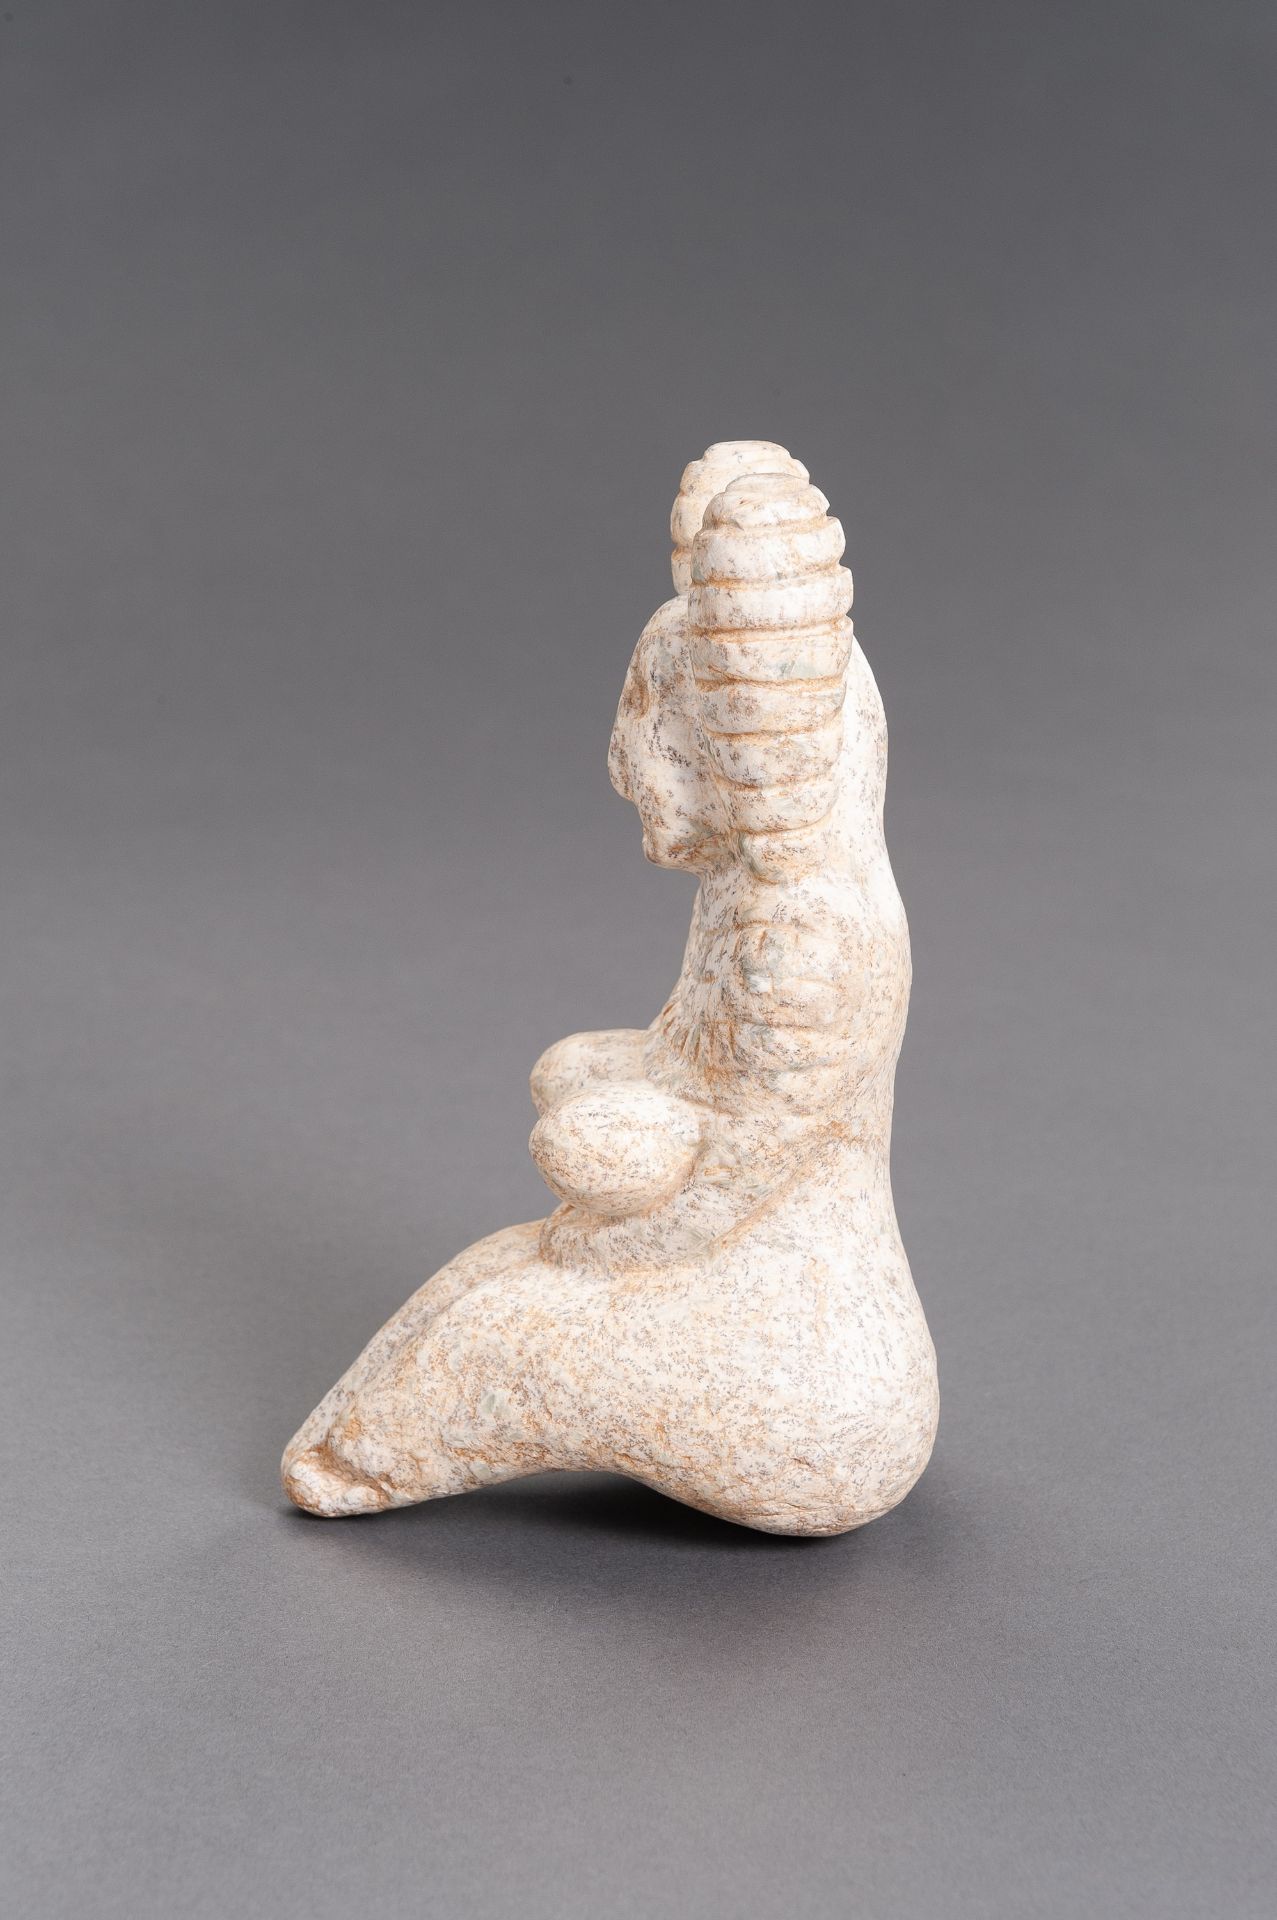 A STONE INDUS VALLEY STYLE FIGURE OF A FERTILITY GODDESS - Image 5 of 9